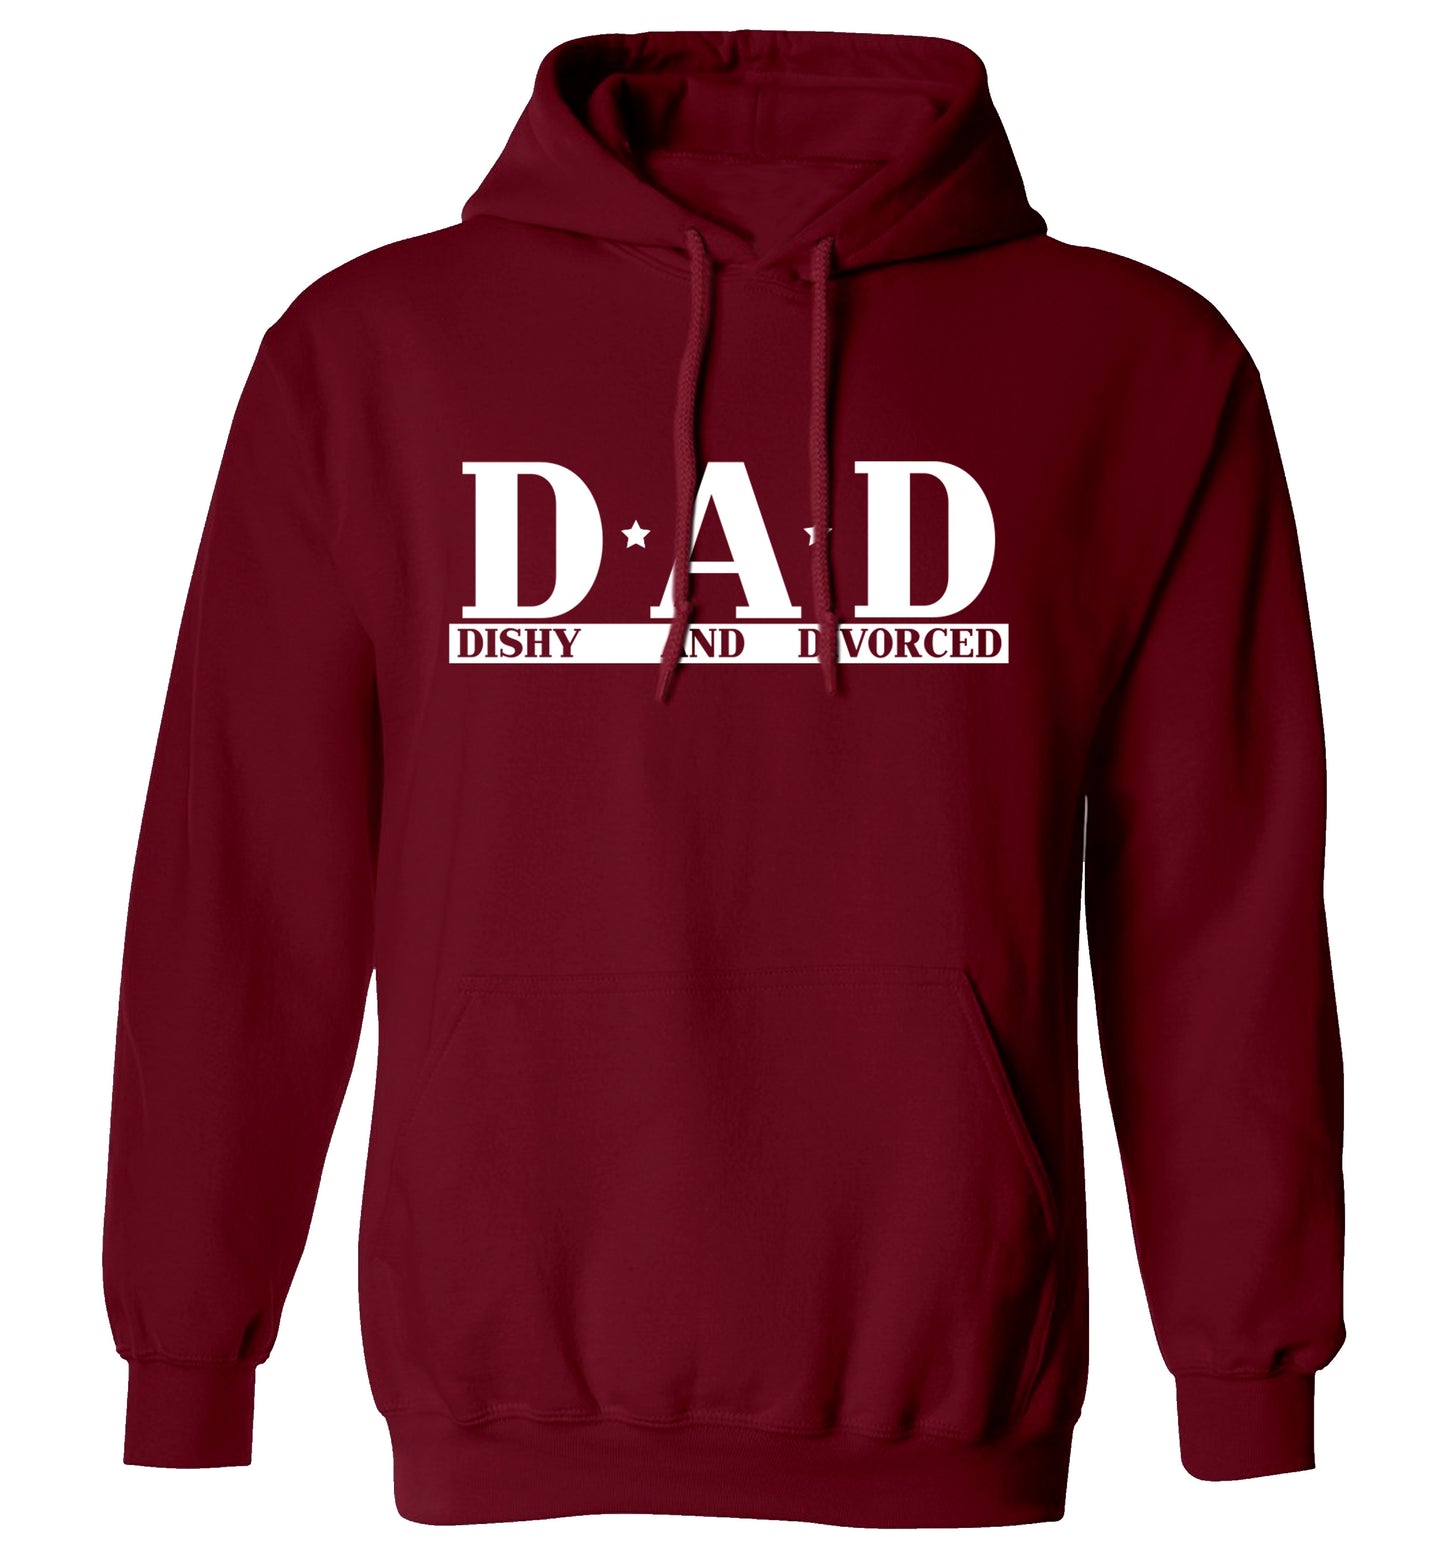 D.A.D meaning Dishy and Divorced adults unisex maroon hoodie 2XL